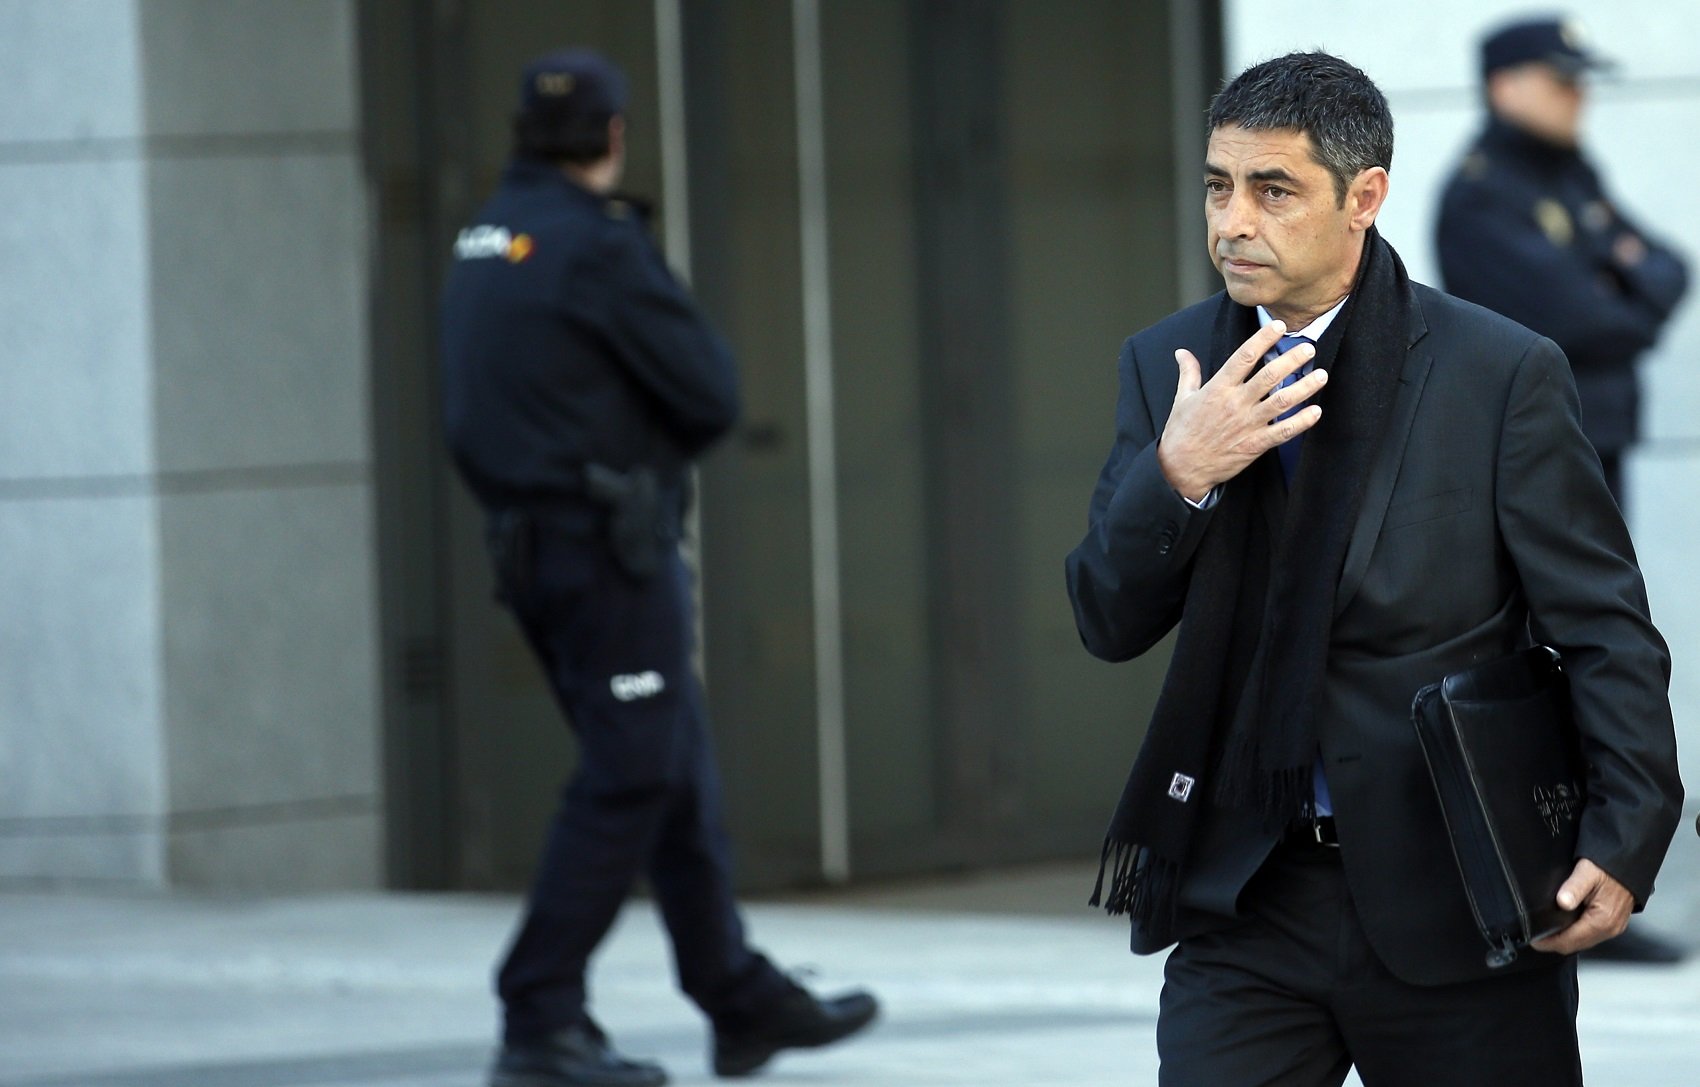 Public prosecutors to charge former Catalan police chief with rebellion